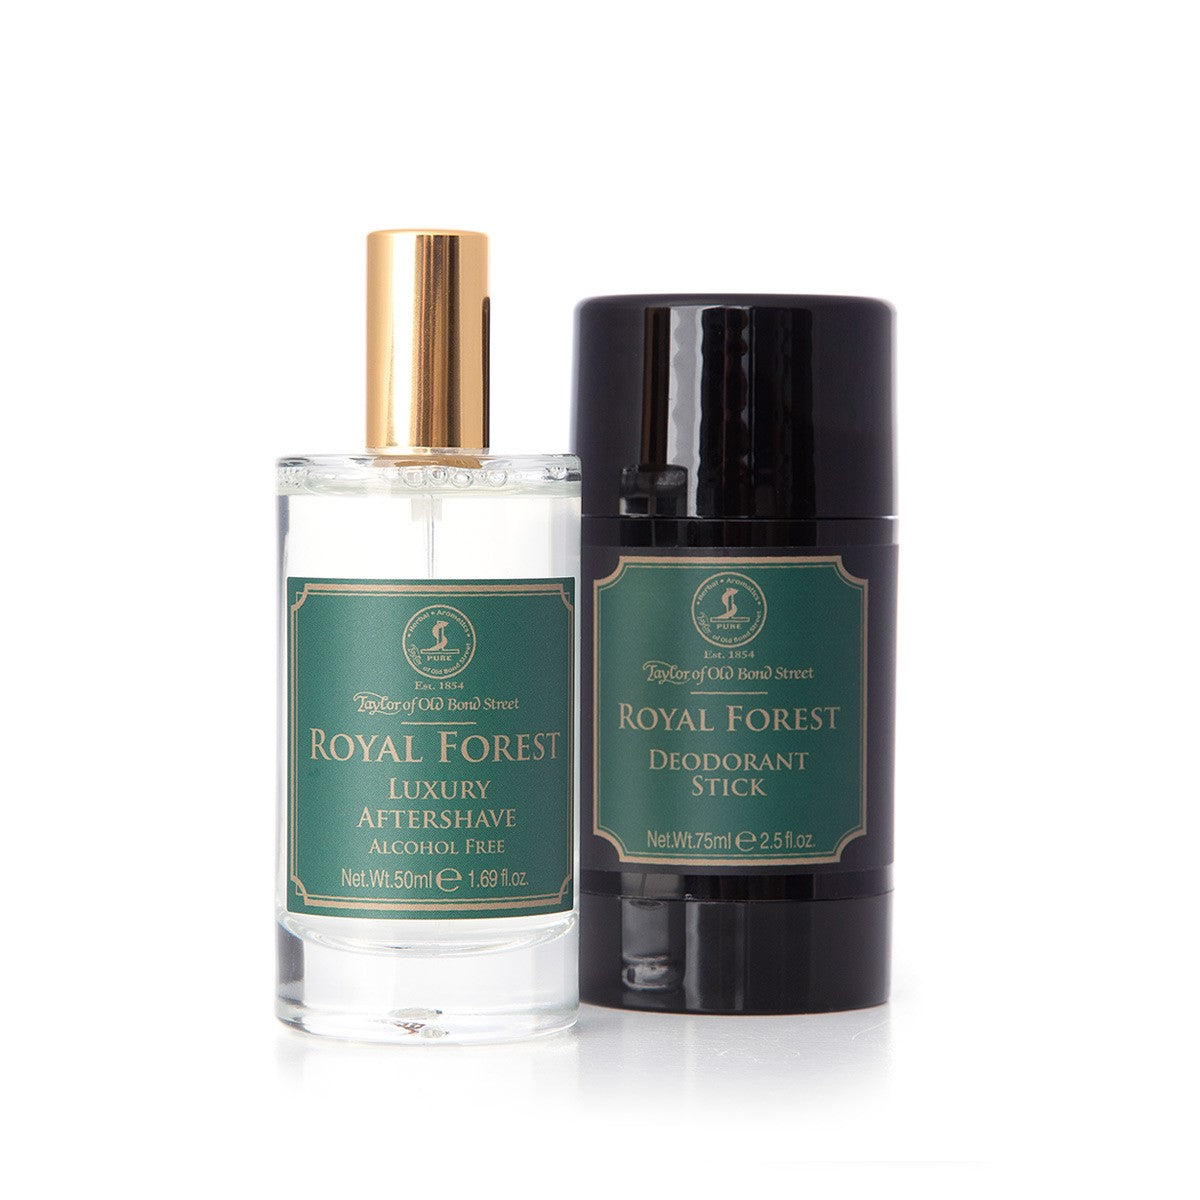 Deodorant Old Street and Bond of Taylor Royal Aftershave Forest Set Gift -